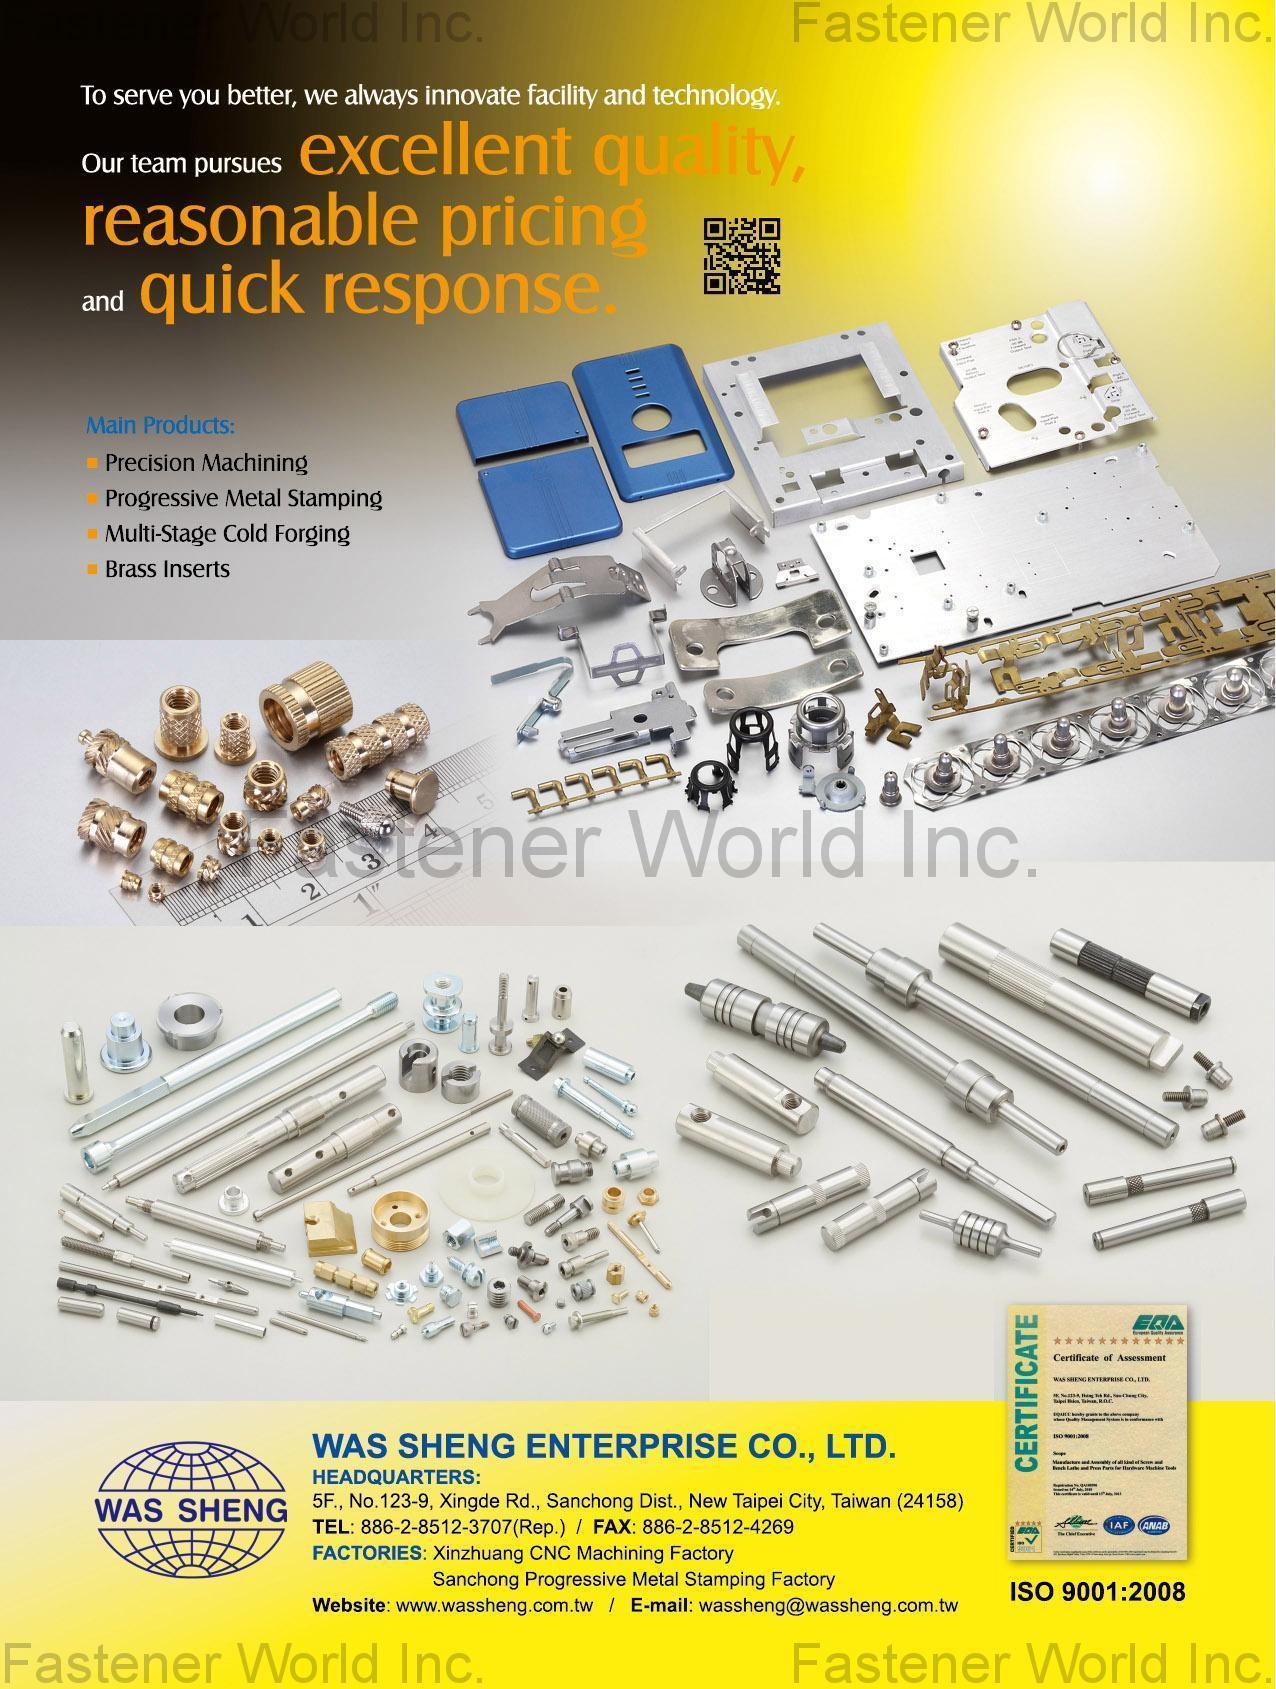 Special Cold / Hot Forming Parts Precision Machining, Progressive Metal Stamping, Multi-Stage Cold Forging, Brass Inserts